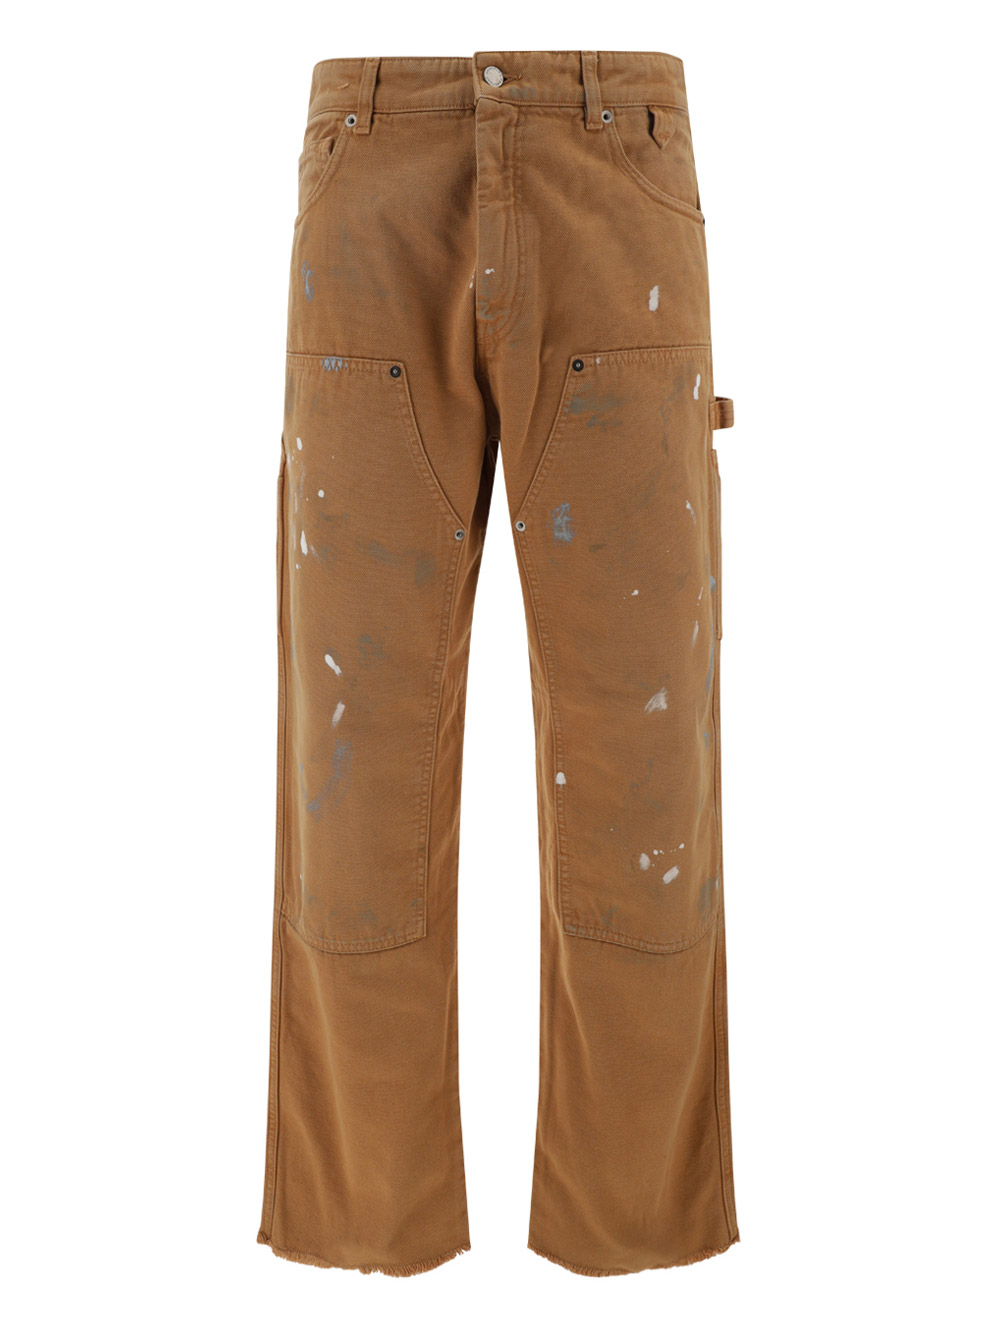 John Relaxed Jeans